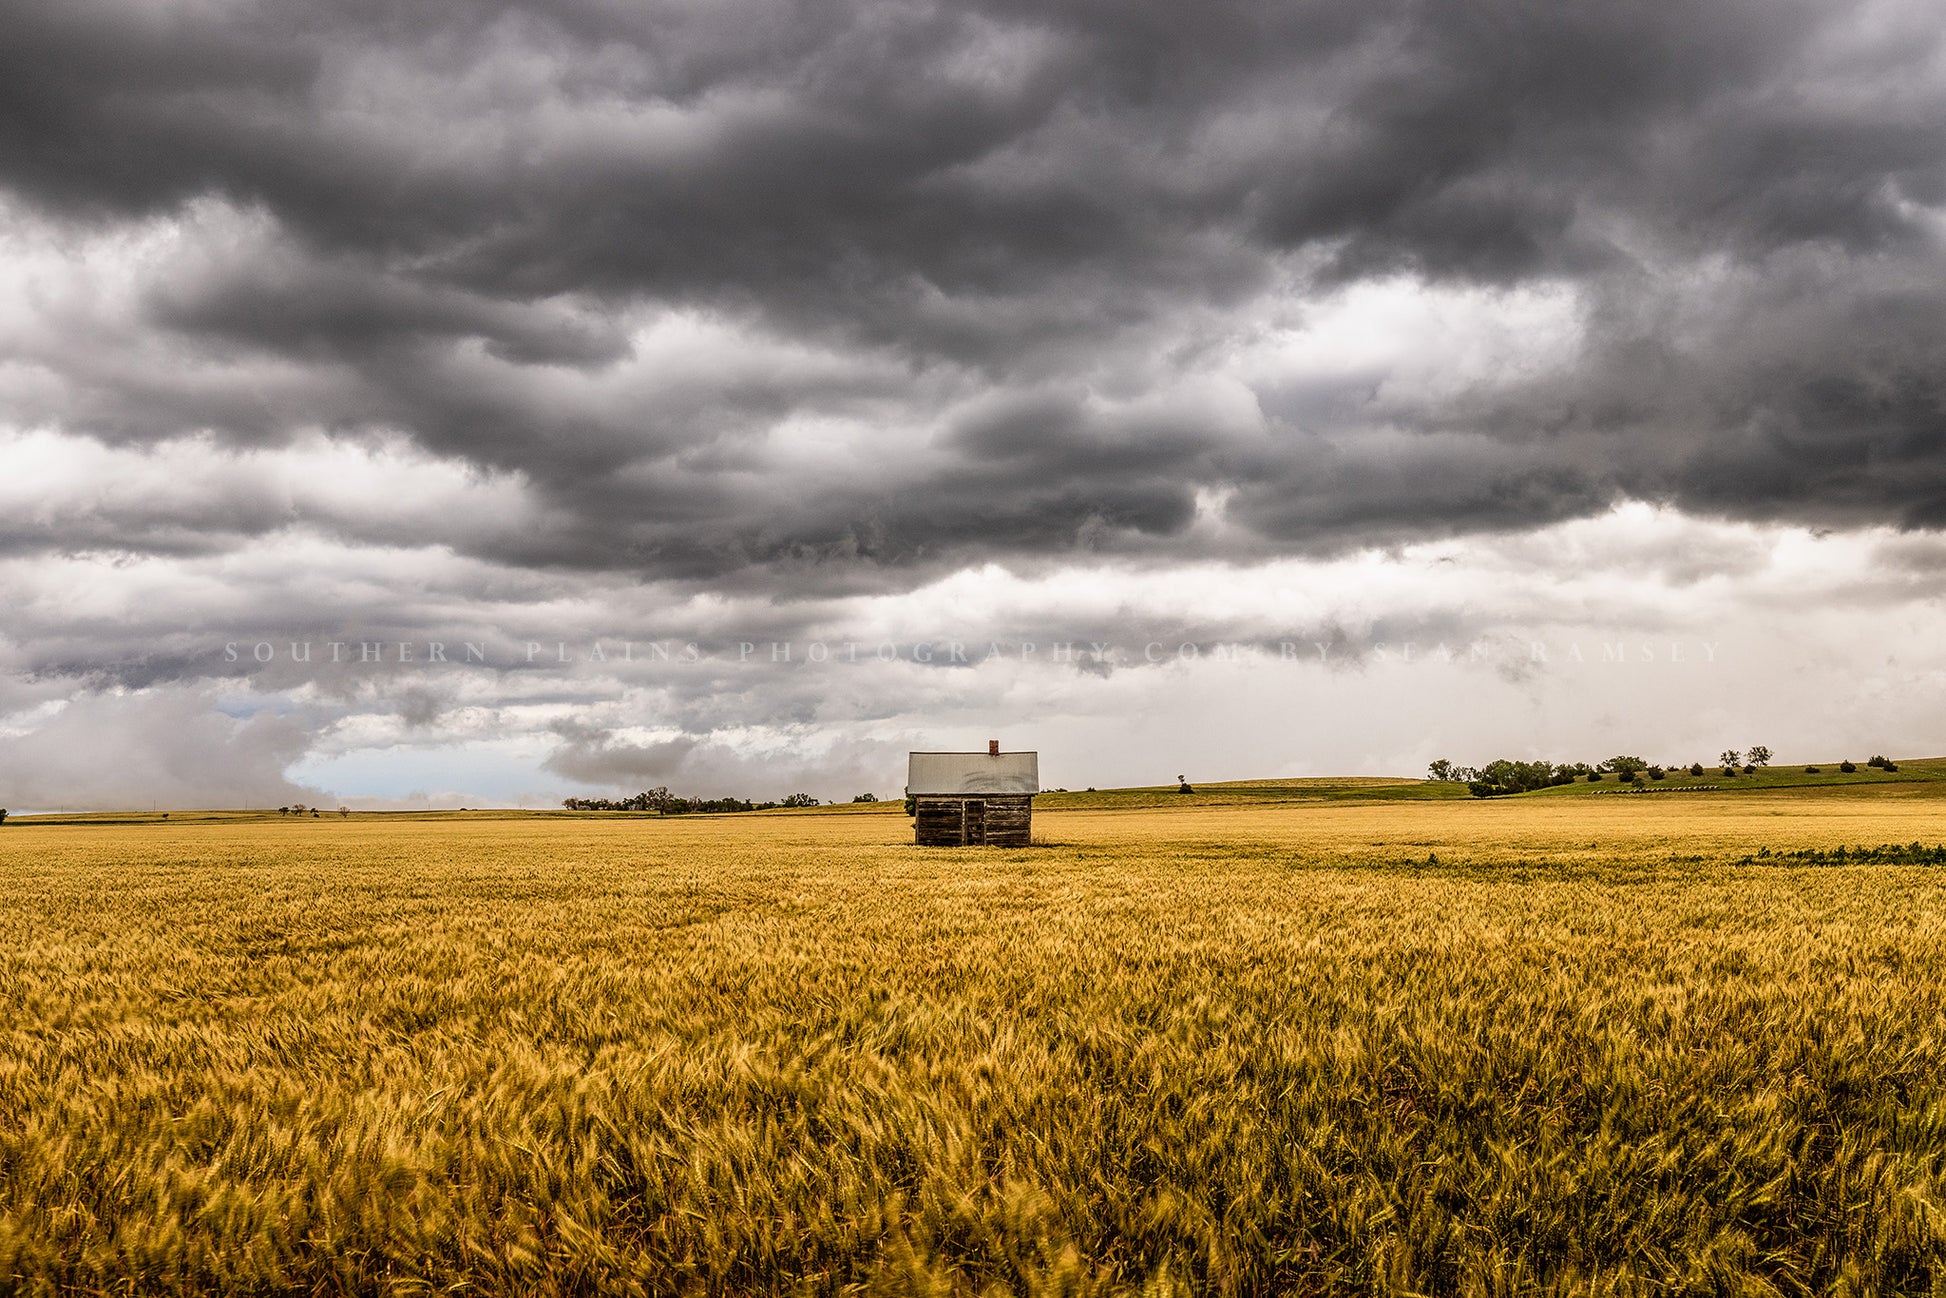 Farm photography print of a well pump house in a wheat field under a stormy sky on a late spring day in Kansas by Sean Ramsey of Southern Plains Photography.